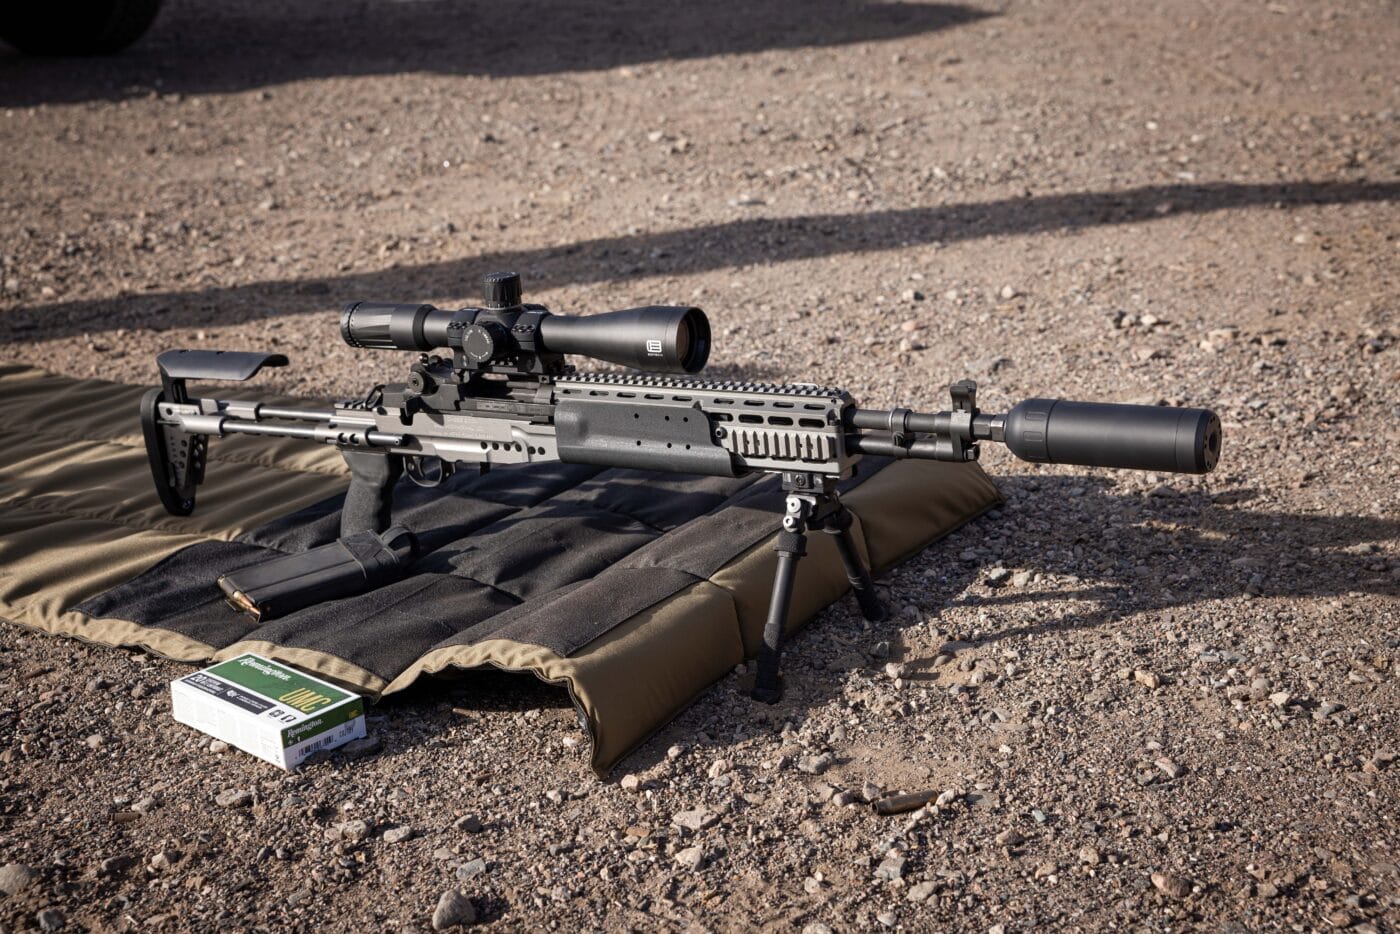 Testing the X2 Dev Group Orion-X Suppressor at the range